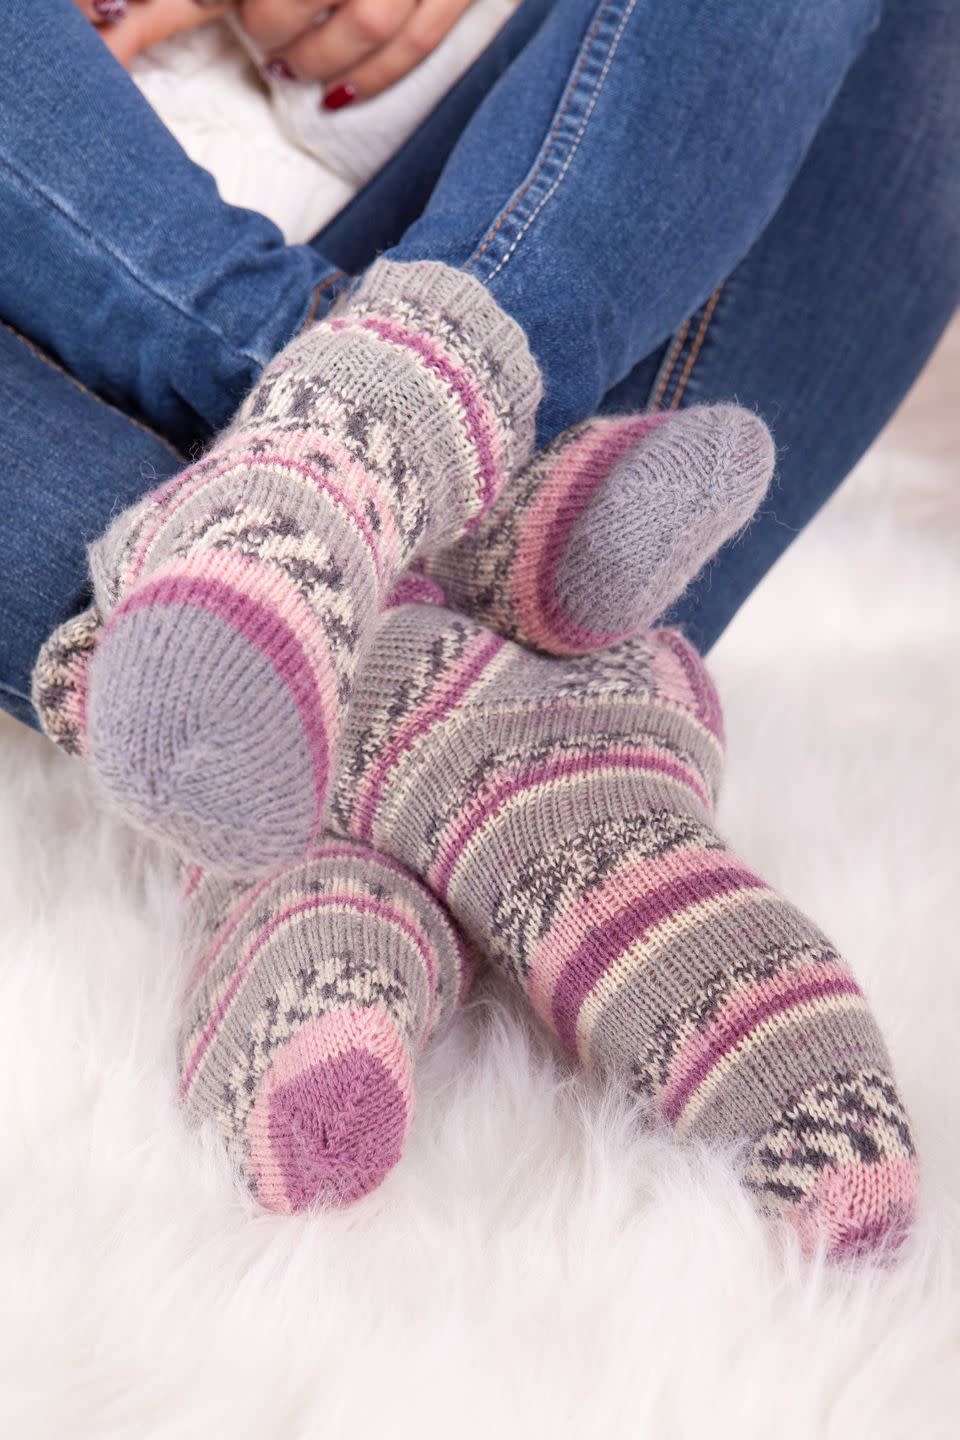 <p>If your feet are always cold, <a href="https://www.womansday.com/health-fitness/a23831431/foot-warmer-heating-pad/" rel="nofollow noopener" target="_blank" data-ylk="slk:grab those slippers" class="link ">grab those slippers</a> to avoid getting sick, Ron Eccles, Ph.D., director of the <a href="http://www.cardiff.ac.uk/biosi/subsites/cold/about.html" rel="nofollow noopener" target="_blank" data-ylk="slk:Common Cold Centre" class="link ">Common Cold Centre</a> at Britain's Cardiff University, tells Woman's Day. </p><p>How? <a href="https://www.womansday.com/health-fitness/a23831431/foot-warmer-heating-pad/" rel="nofollow noopener" target="_blank" data-ylk="slk:Chilly tootsies" class="link ">Chilly tootsies</a> <a href="https://academic.oup.com/fampra/article/22/6/608/497956" rel="nofollow noopener" target="_blank" data-ylk="slk:tell your brain" class="link ">tell your brain</a> to conserve body heat, in turn reducing blood flow to areas that lose heat quickly, he explains. Decreased blood flow means fewer infection-fighting white blood cells, leaving you more vulnerable to viruses. </p>